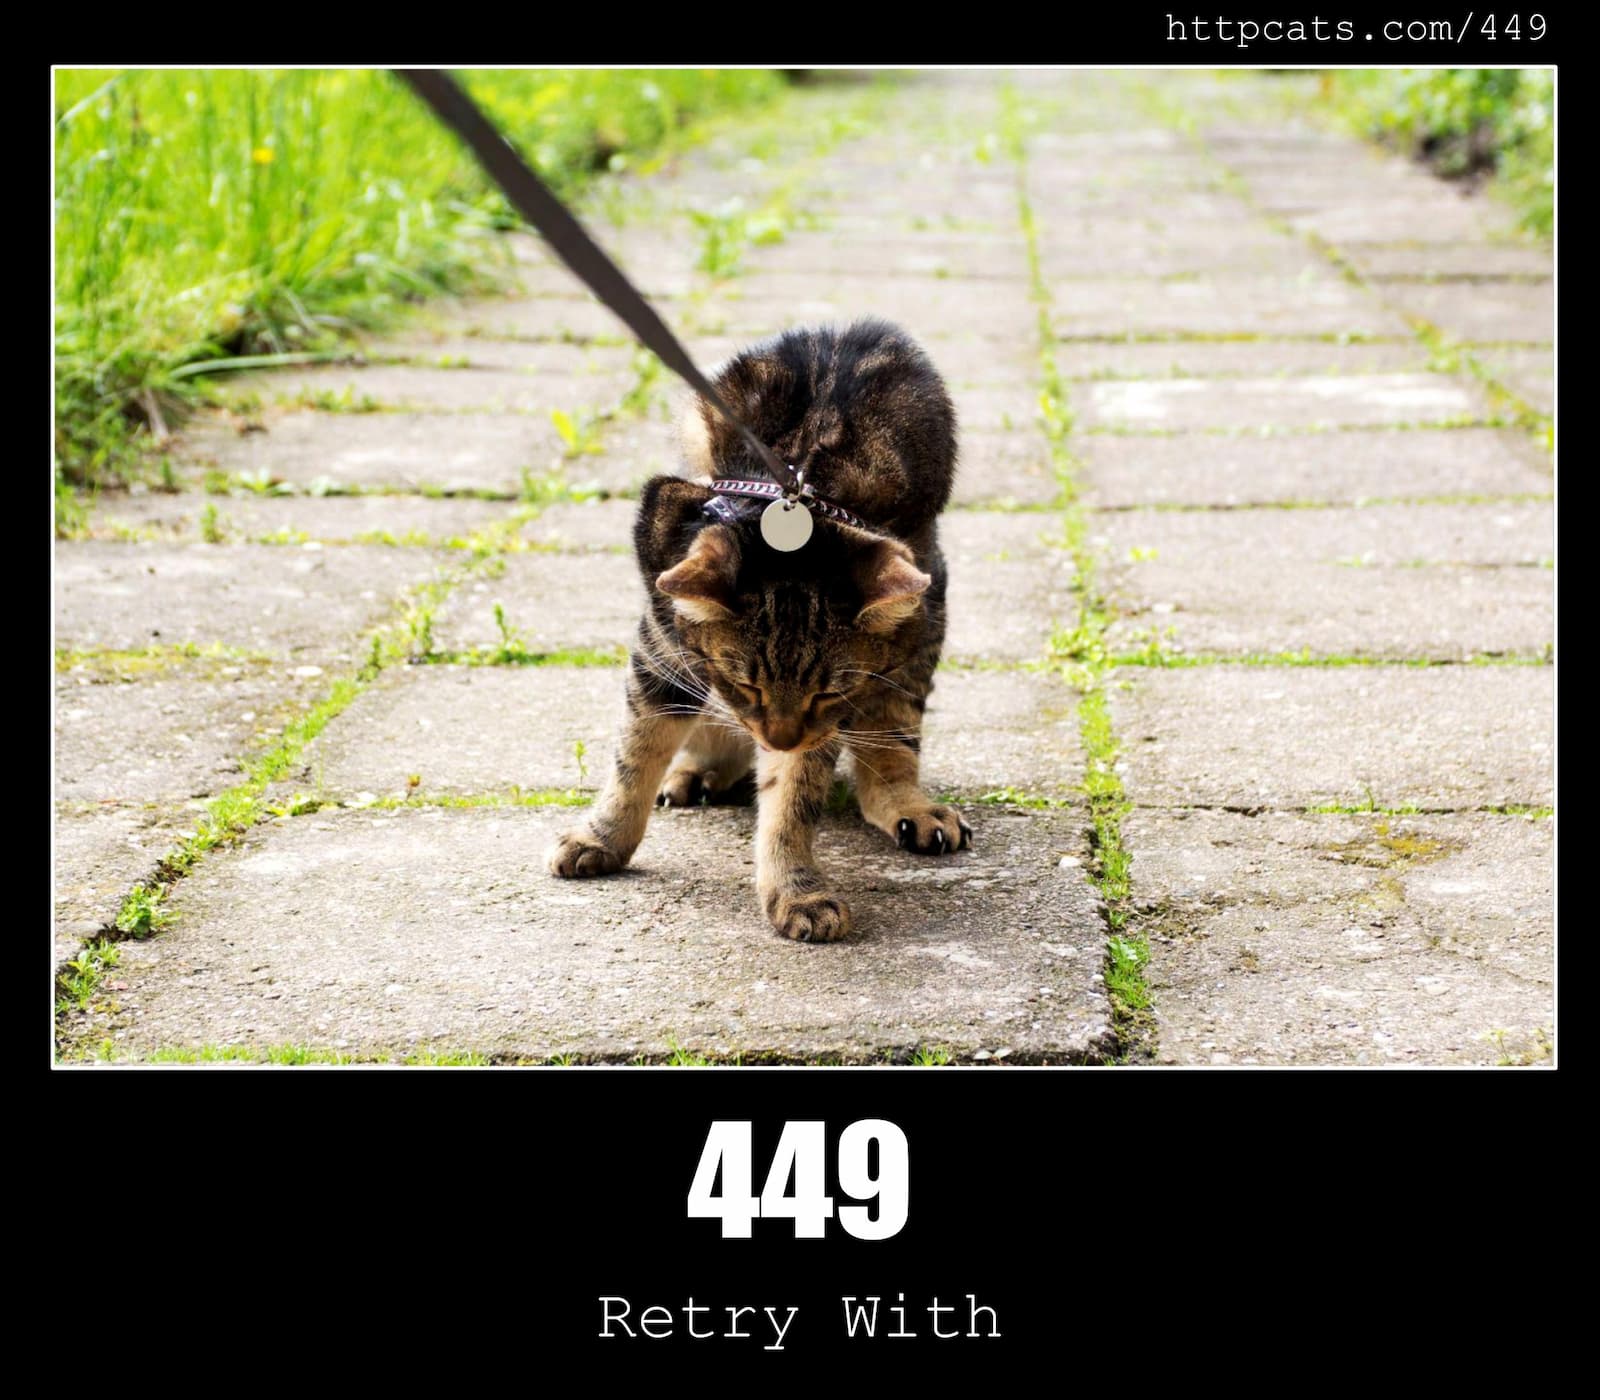 HTTP Status Code 449 Retry With & Cats